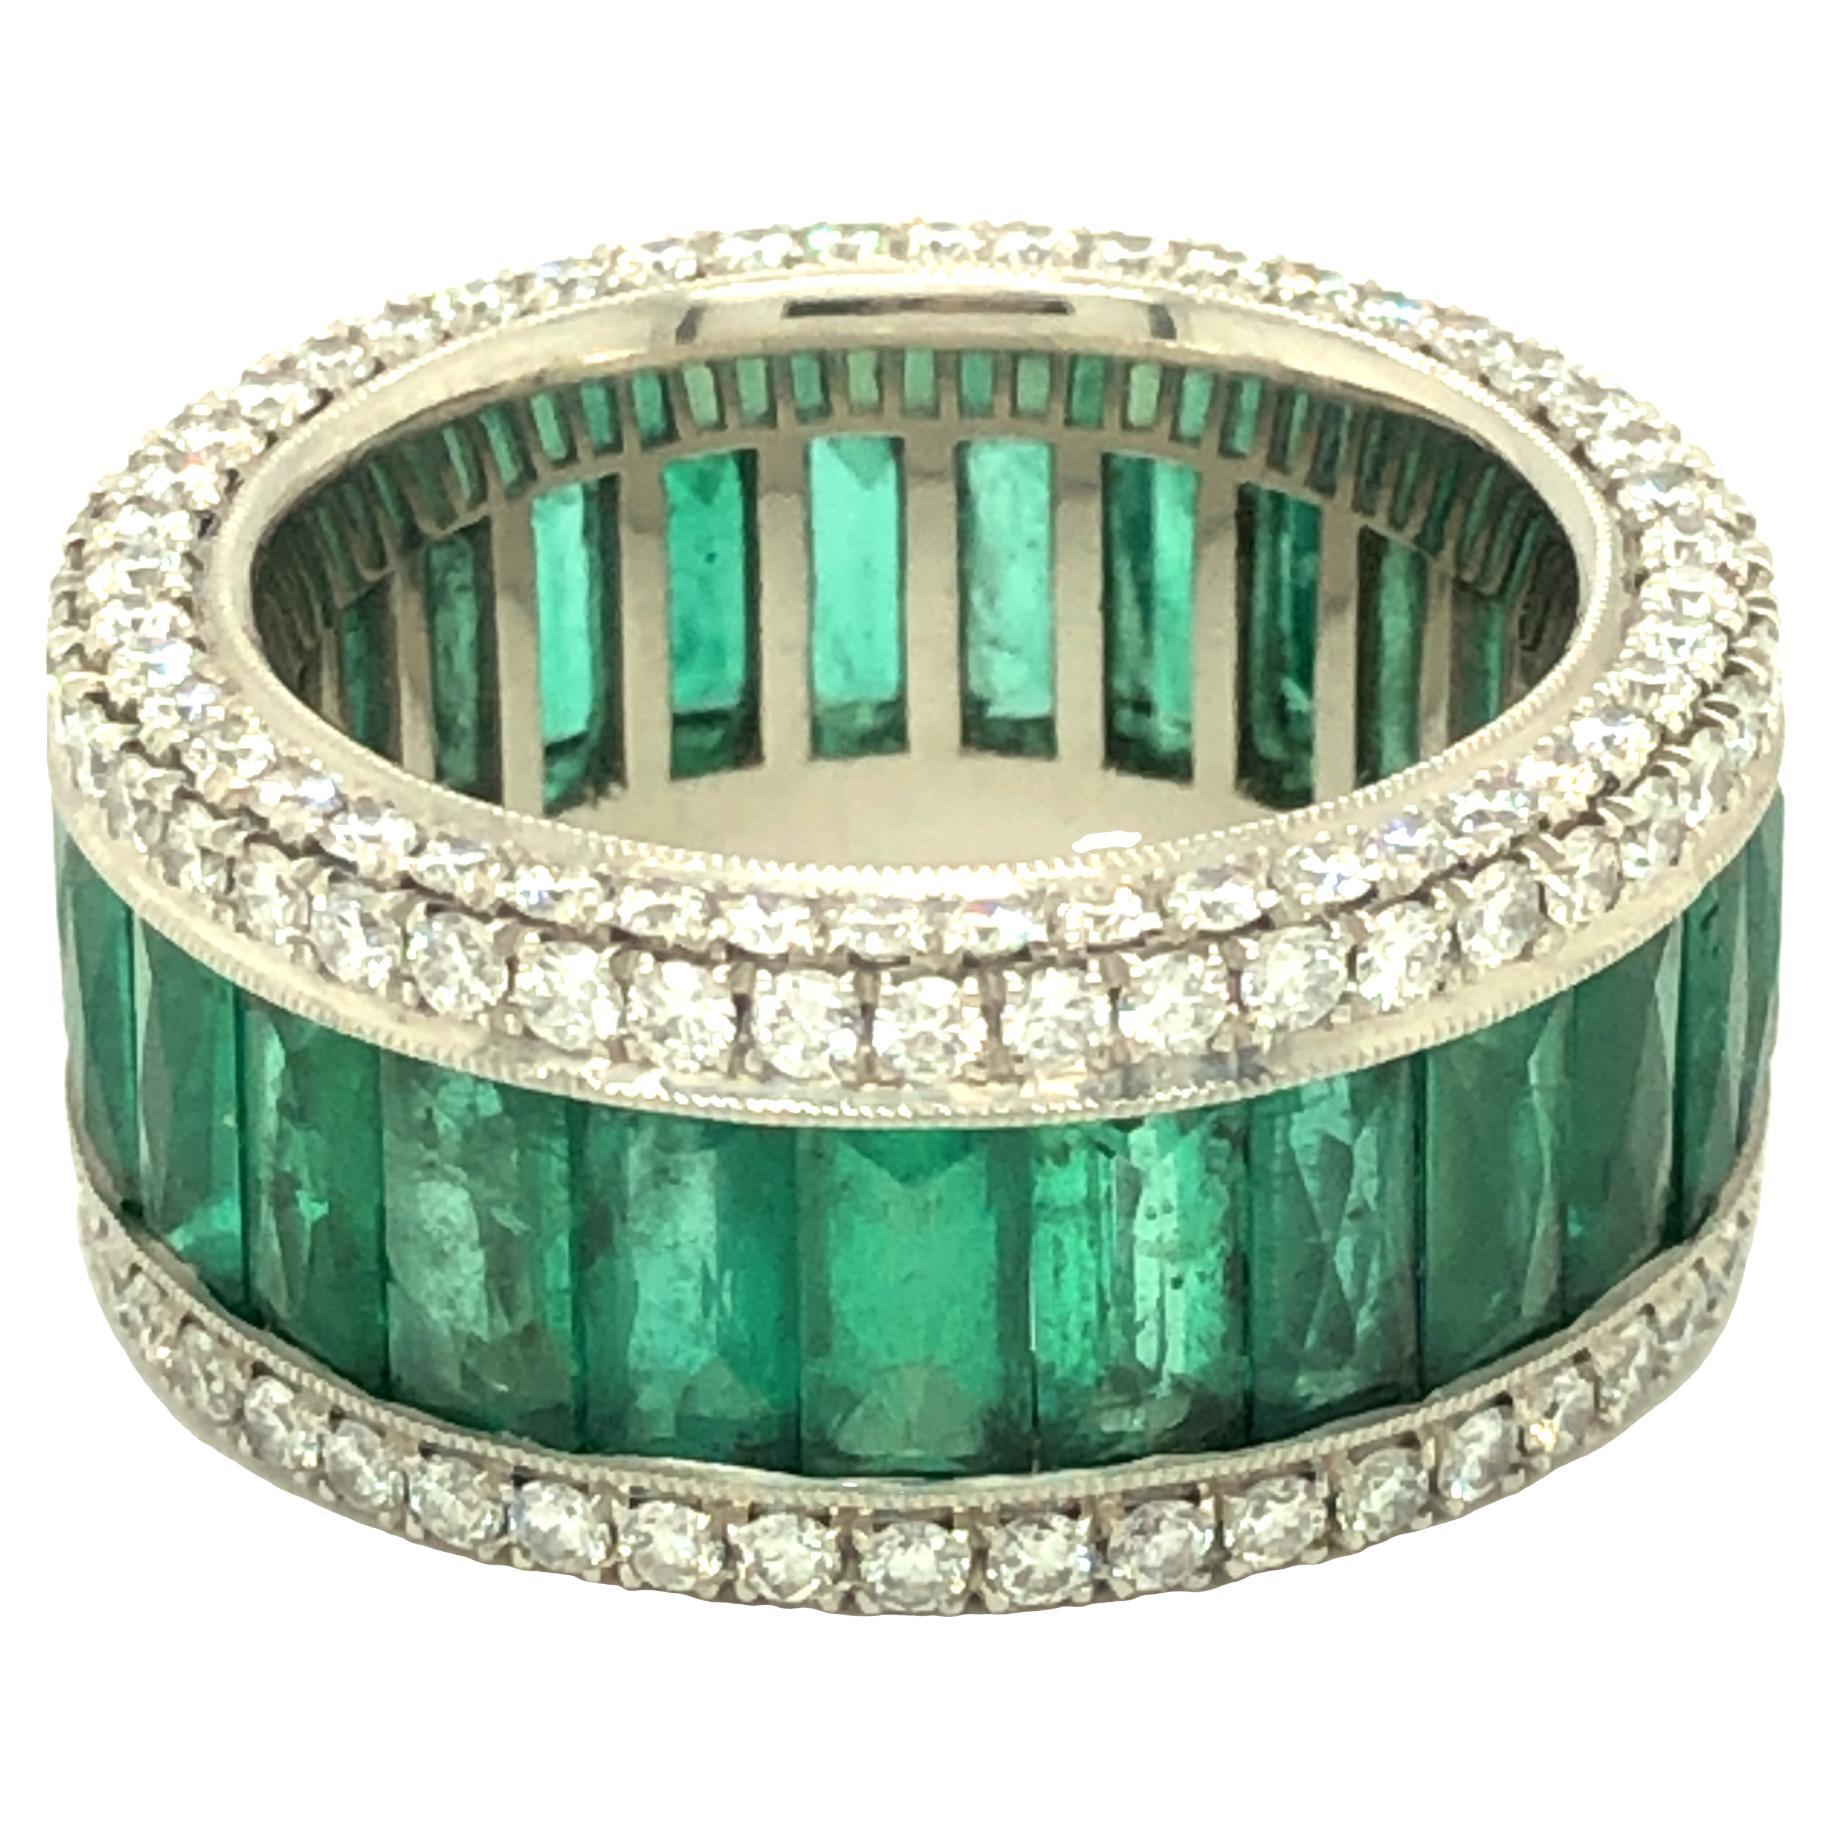 Gems Are Forever 7 carat French Cut Emerald & 2.07 carat Diamond Eternity Band